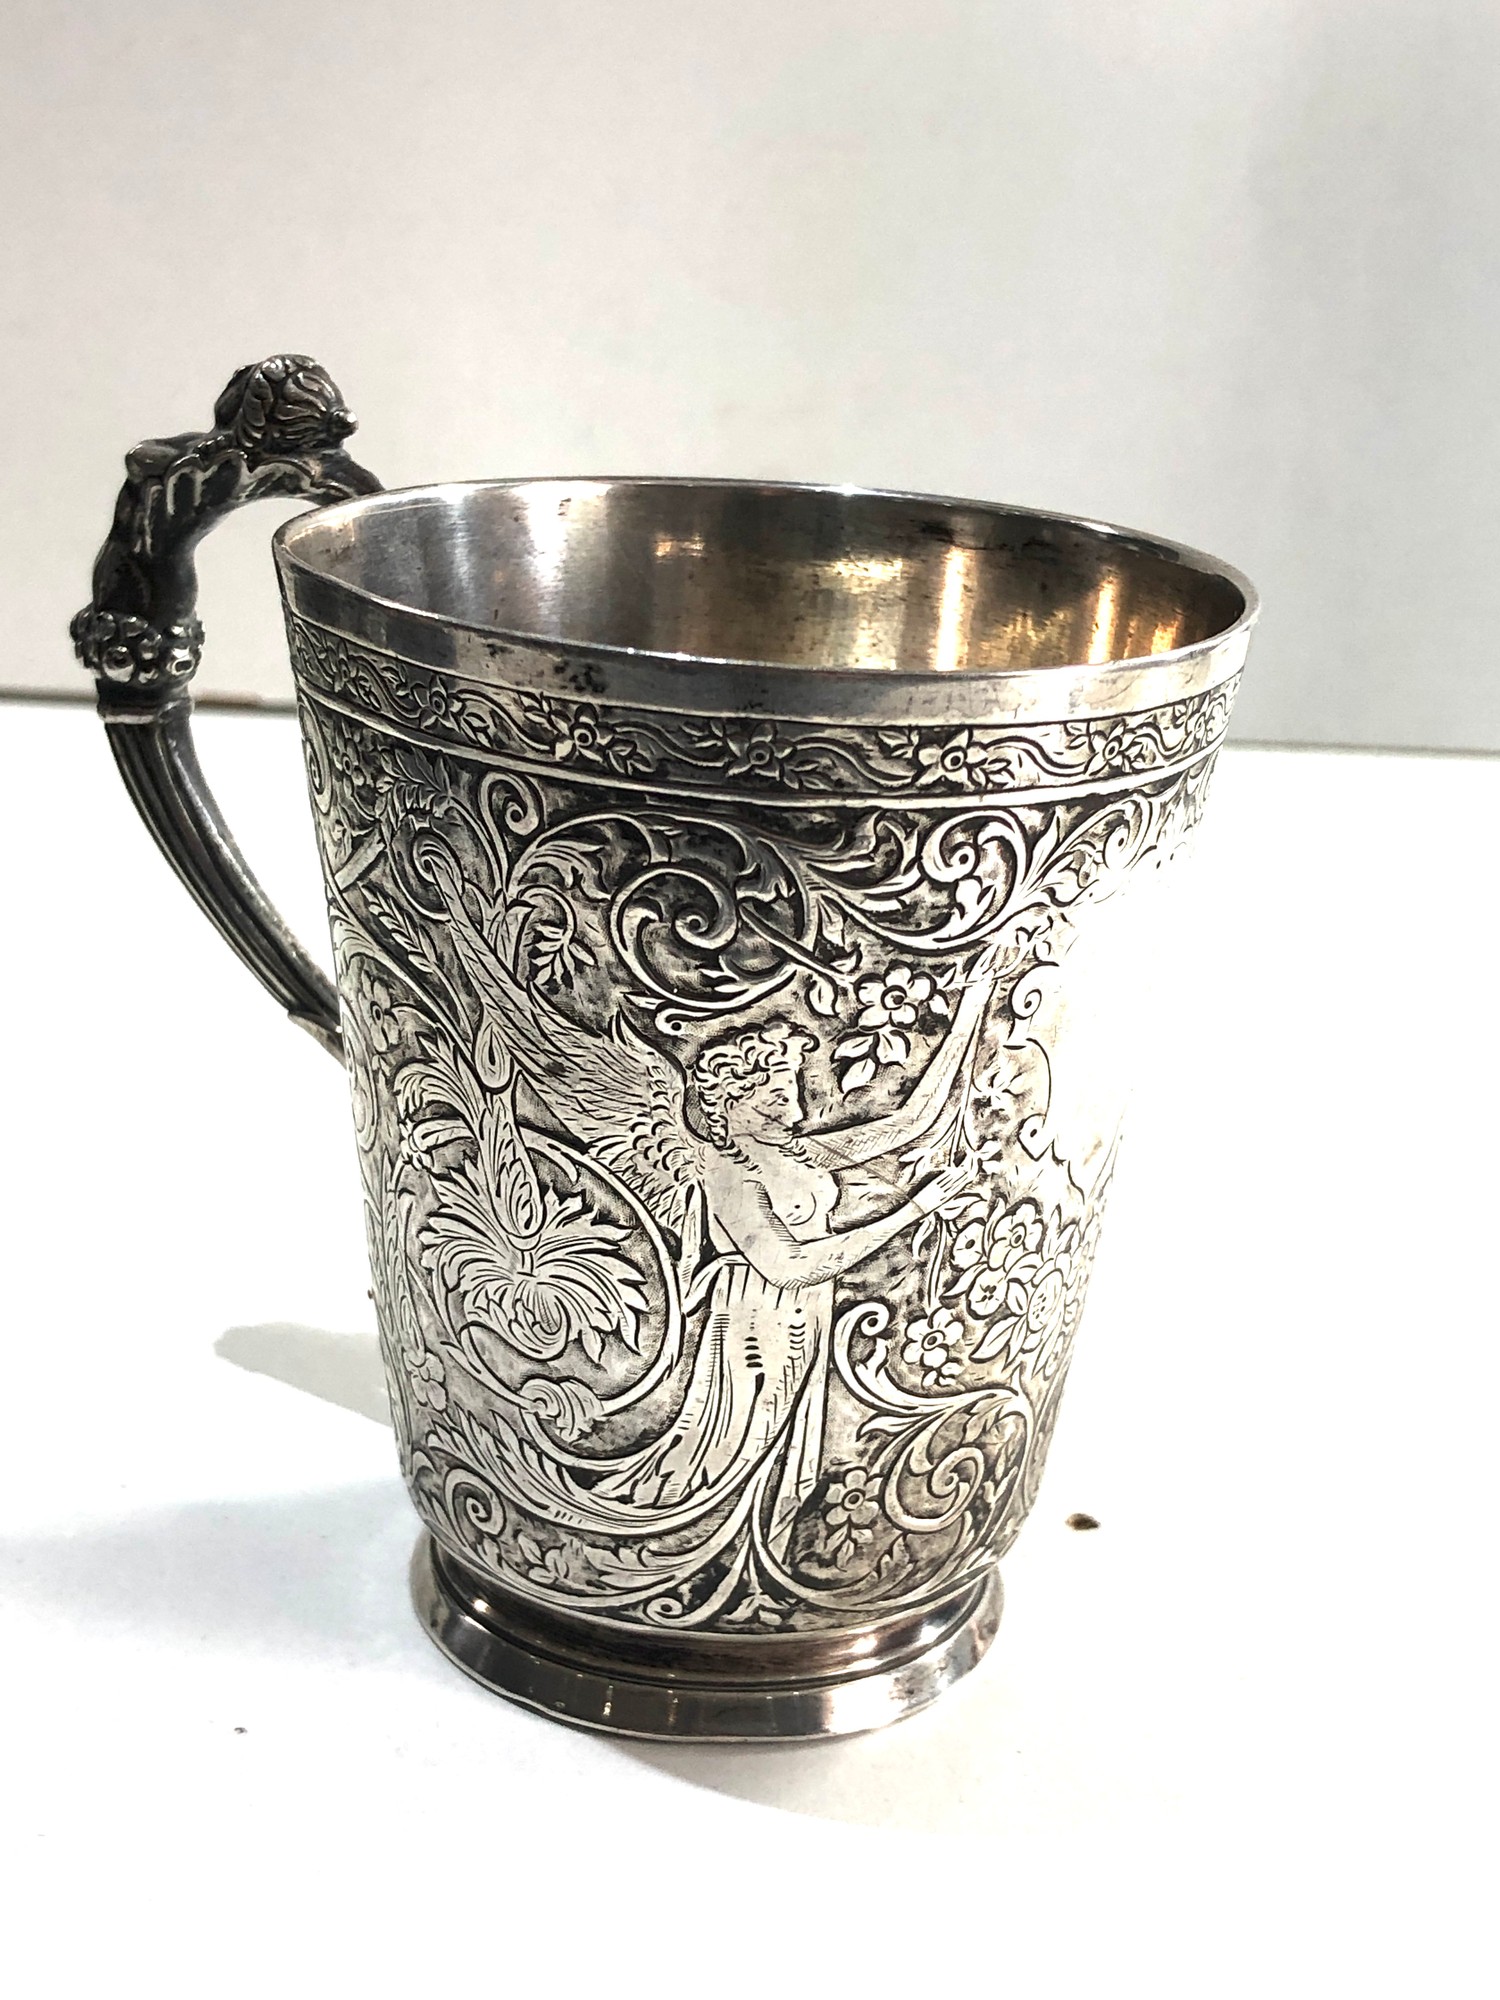 Fine Antique French silver handled cup fine embossed detail of angels and floral pattern design - Image 7 of 11